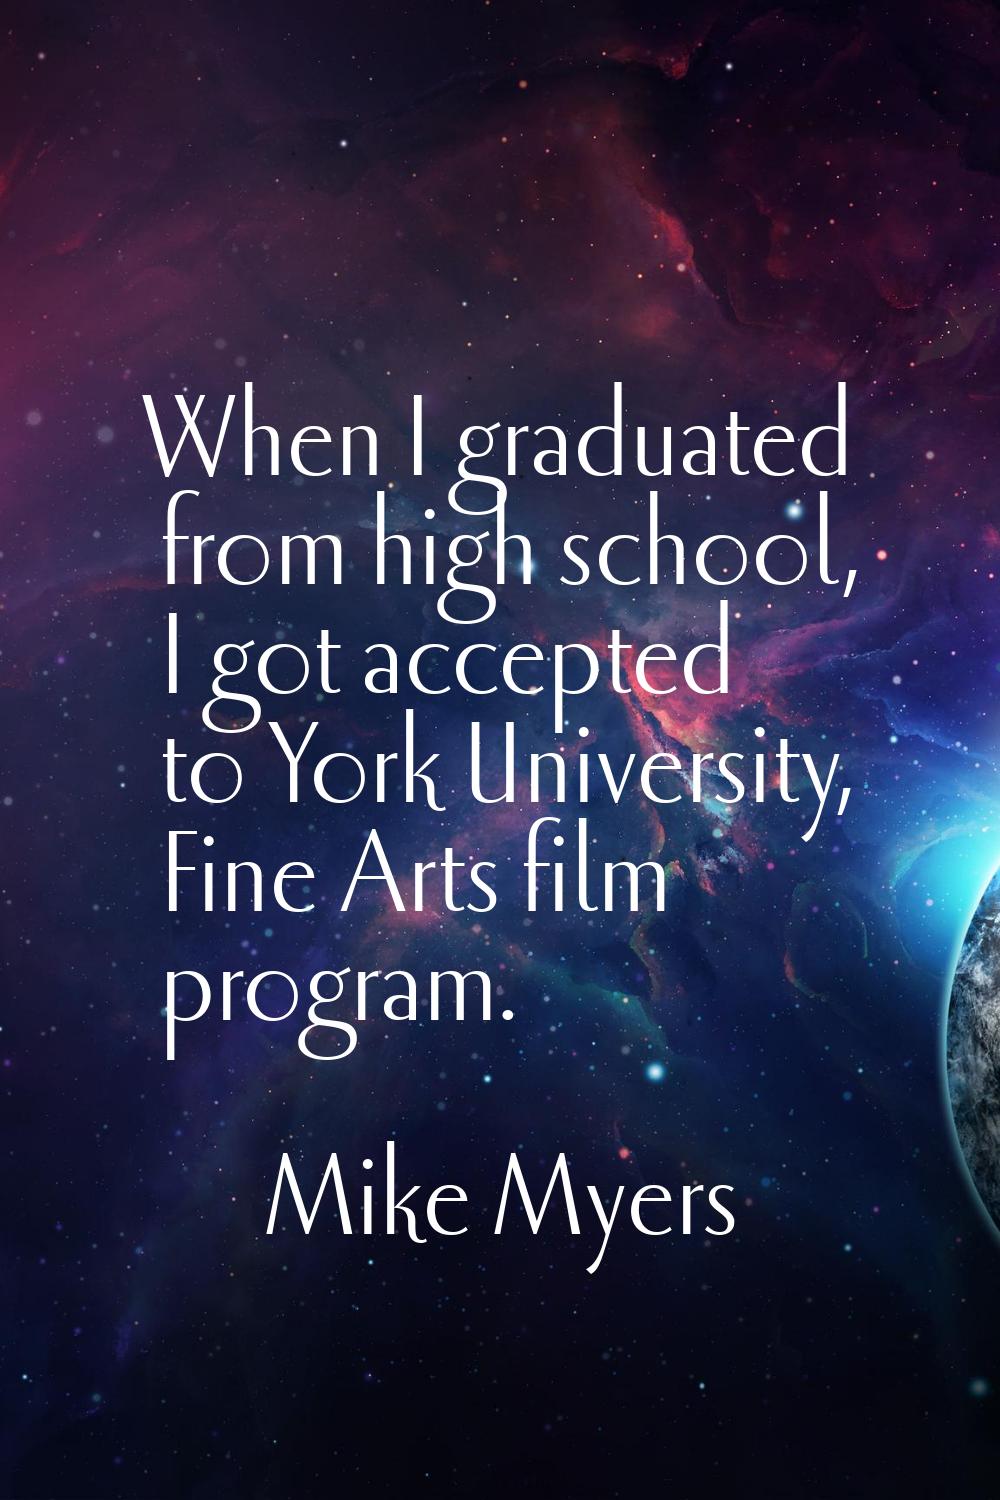 When I graduated from high school, I got accepted to York University, Fine Arts film program.